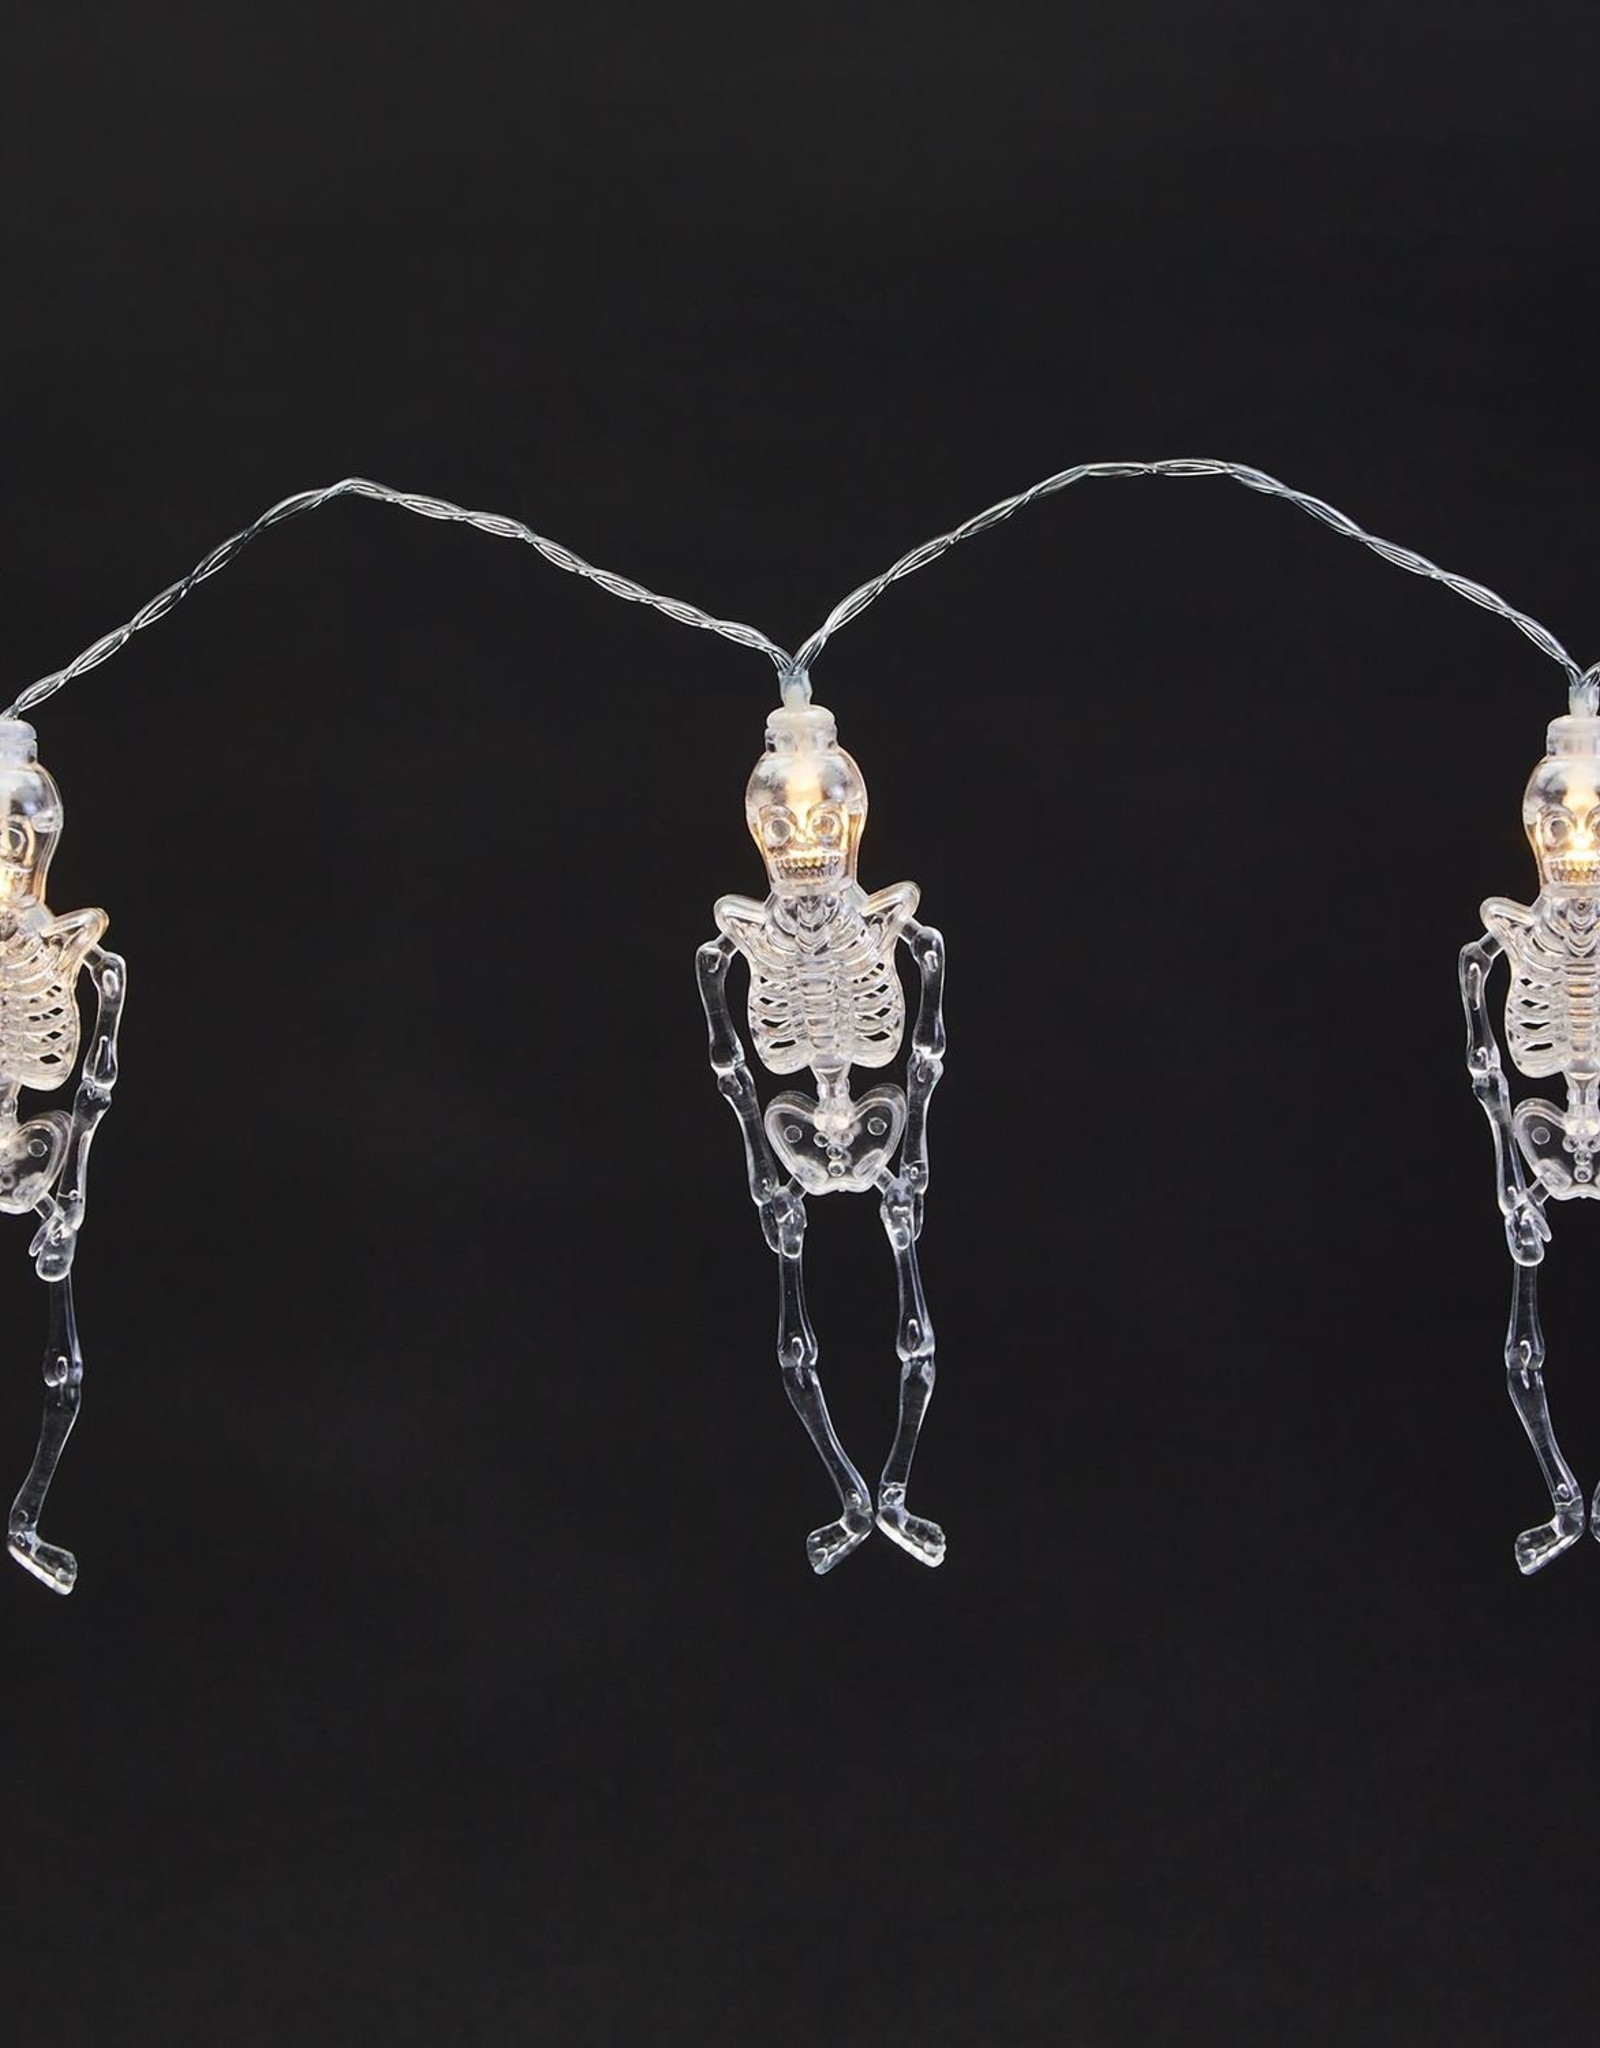 Two's Company Skeleton String Lights